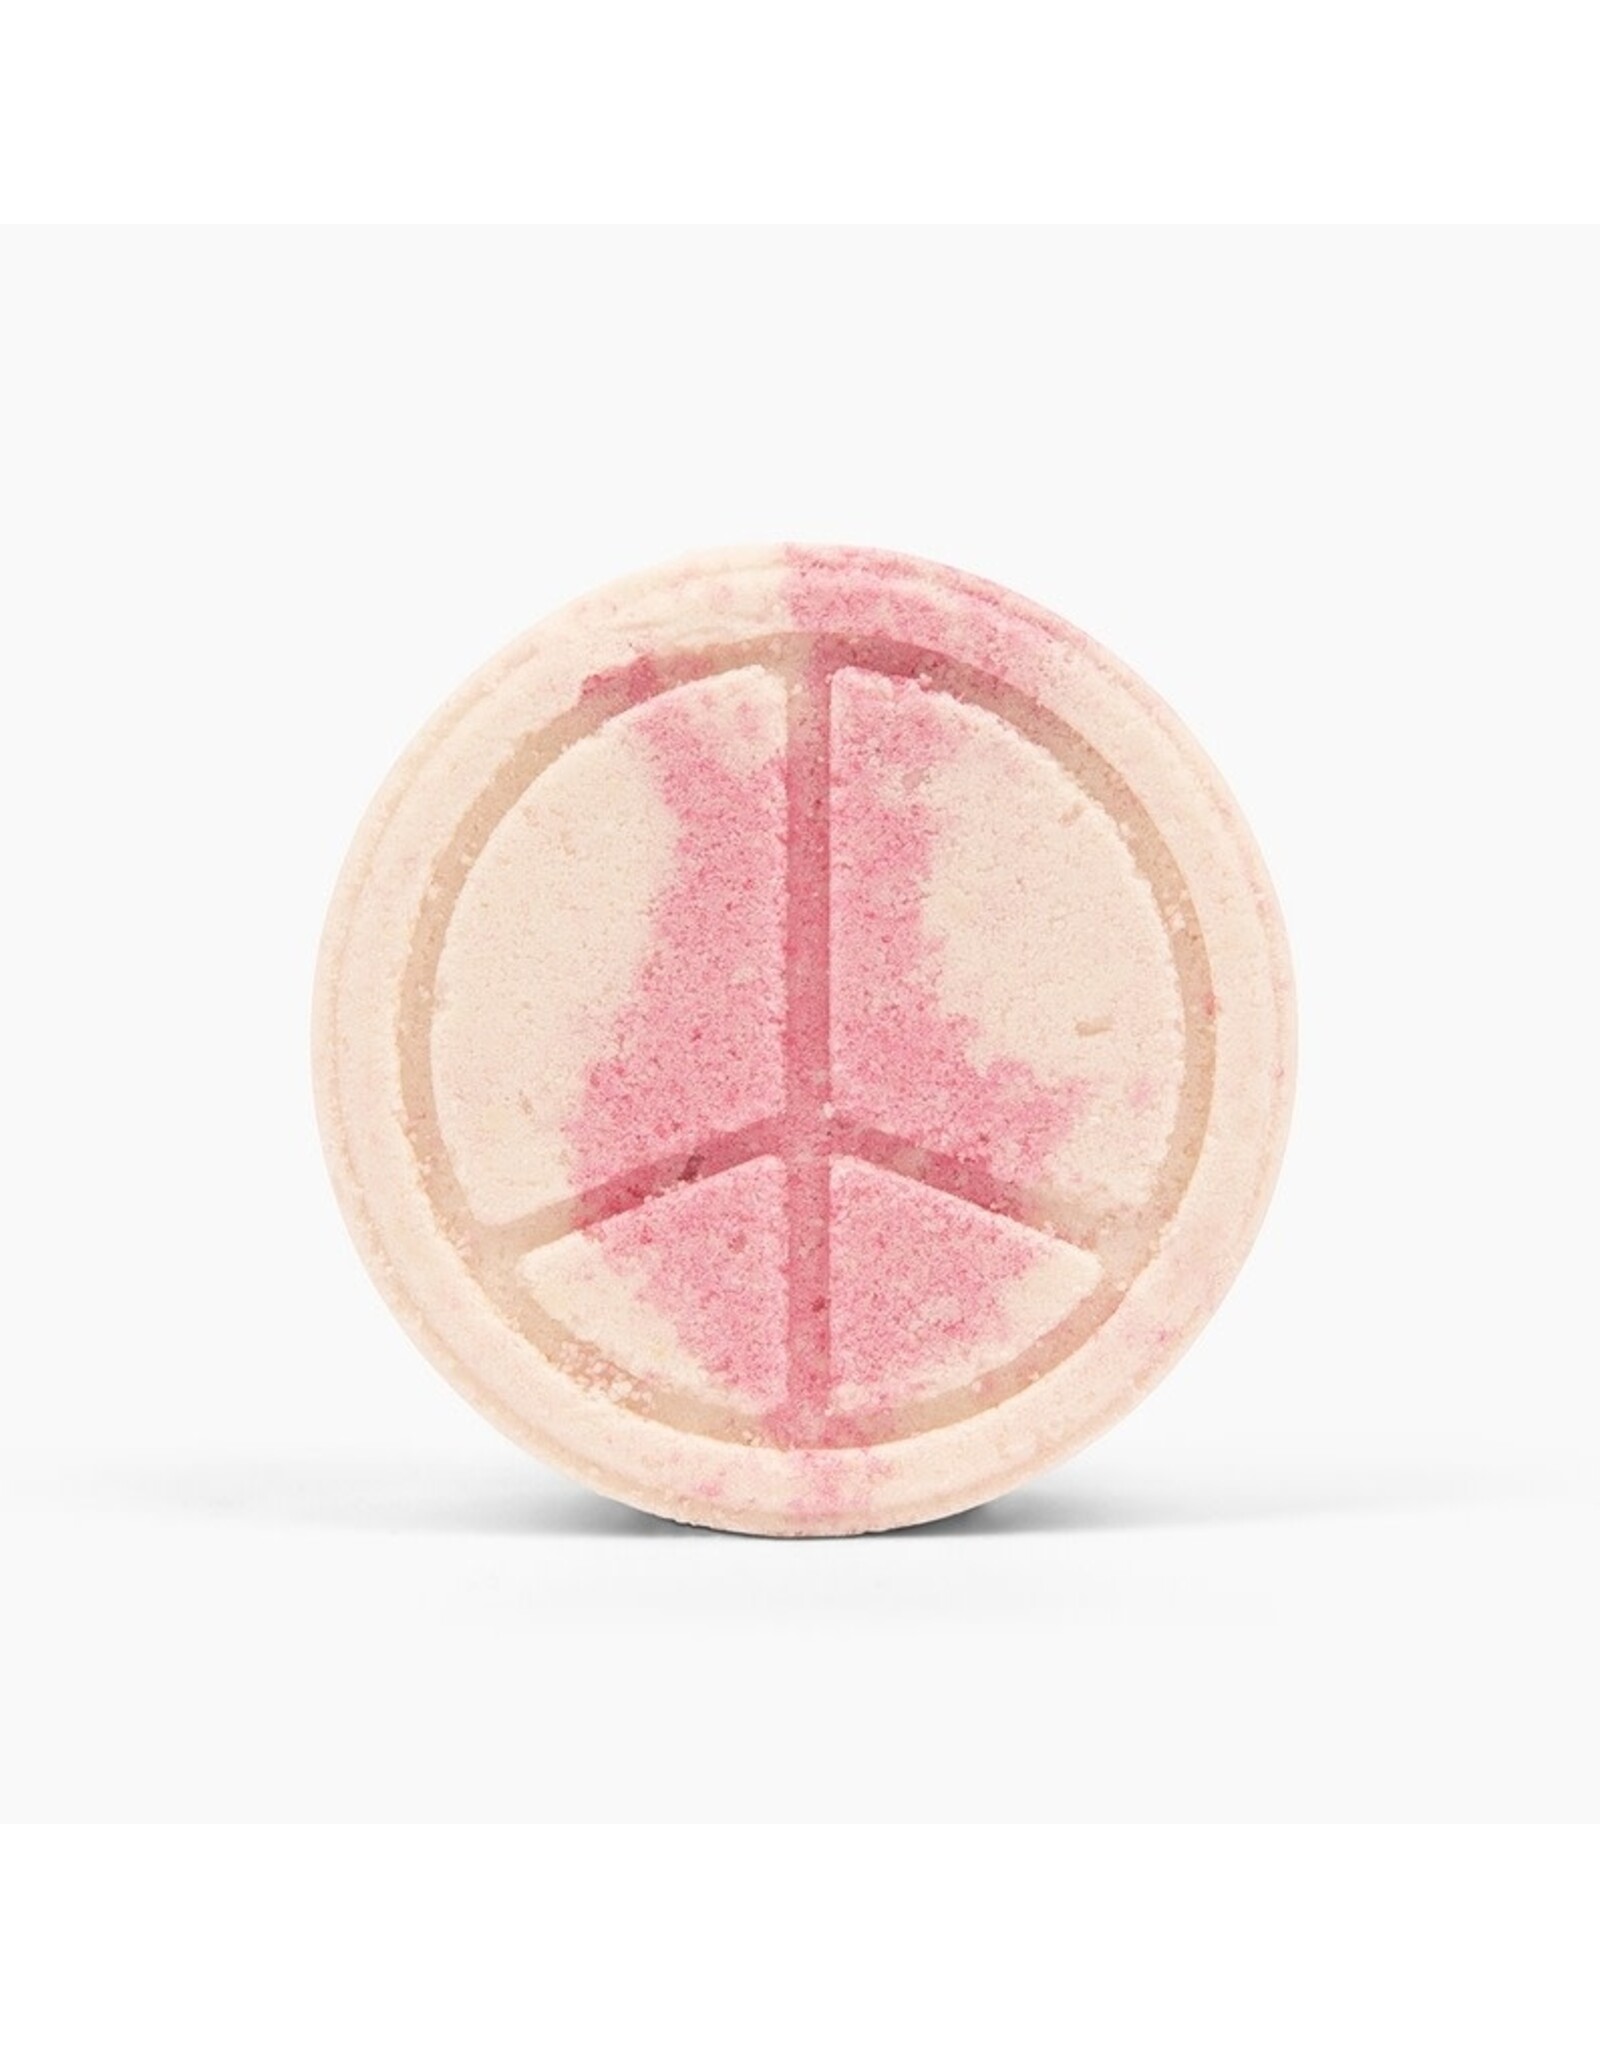 Spinster Sisters Patchouli Rose Bath Butta' Bomb